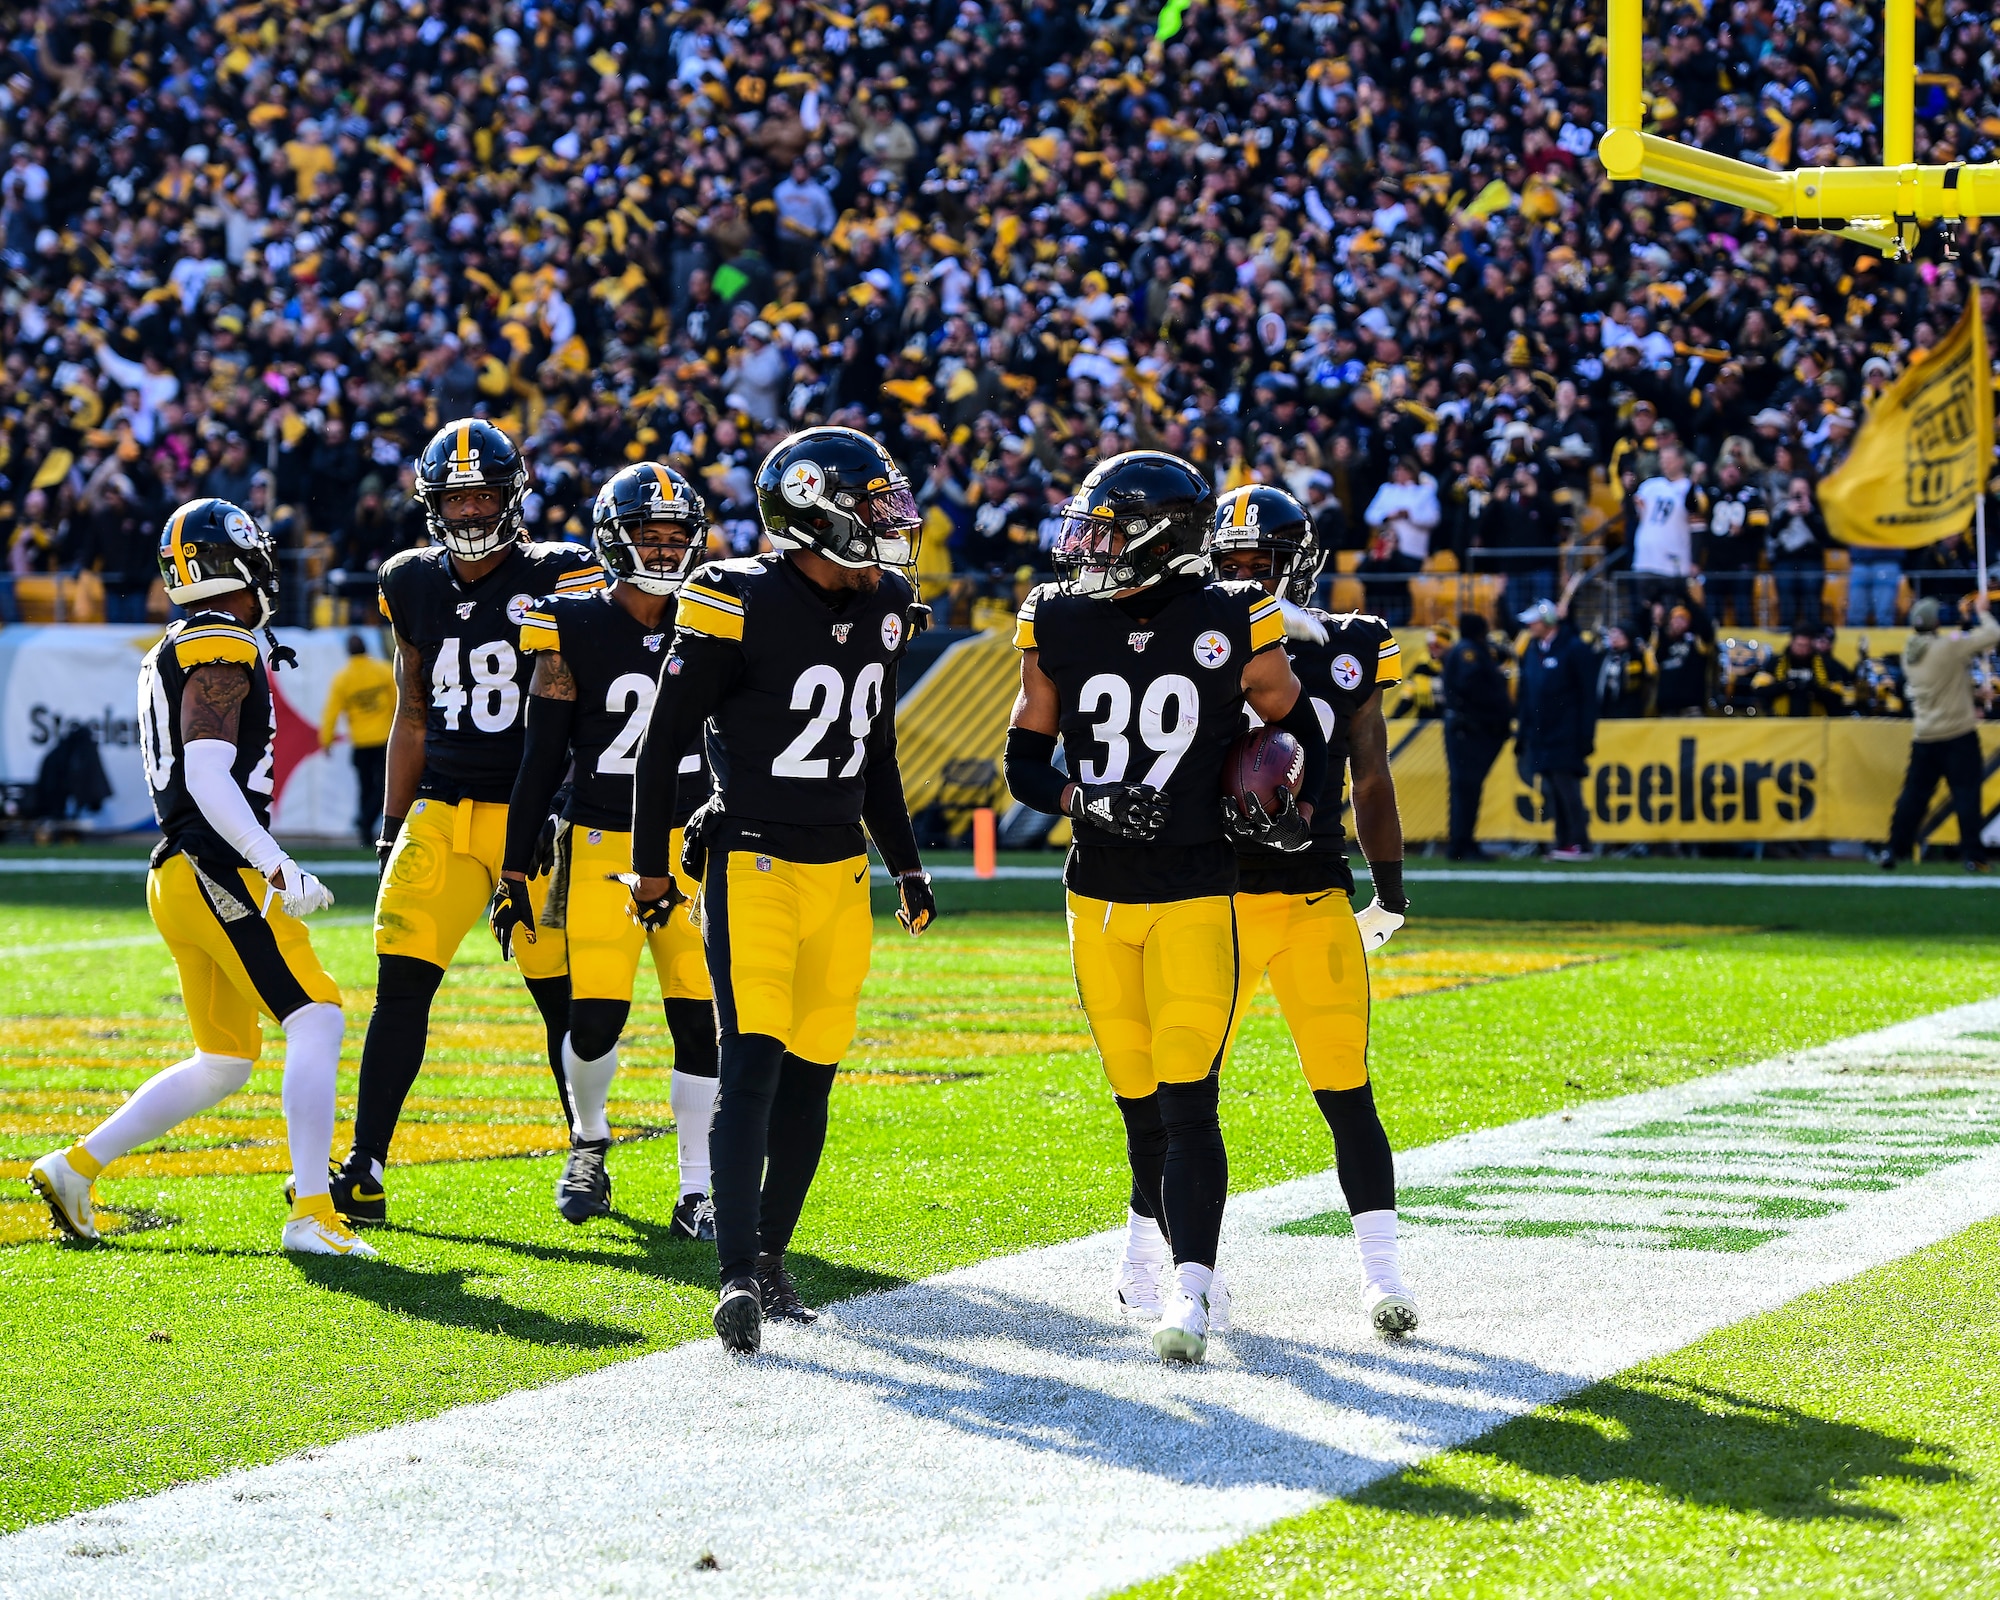 Pittsburgh Steelers safety Minkah Fitzpatrick celebrates with his teammates after returning an interception for a touchdown during a Pittsburgh Steelers vs. Indianapolis Colts game at Heinz Field in Pittsburgh, Pennsylvania, November 3, 2019.